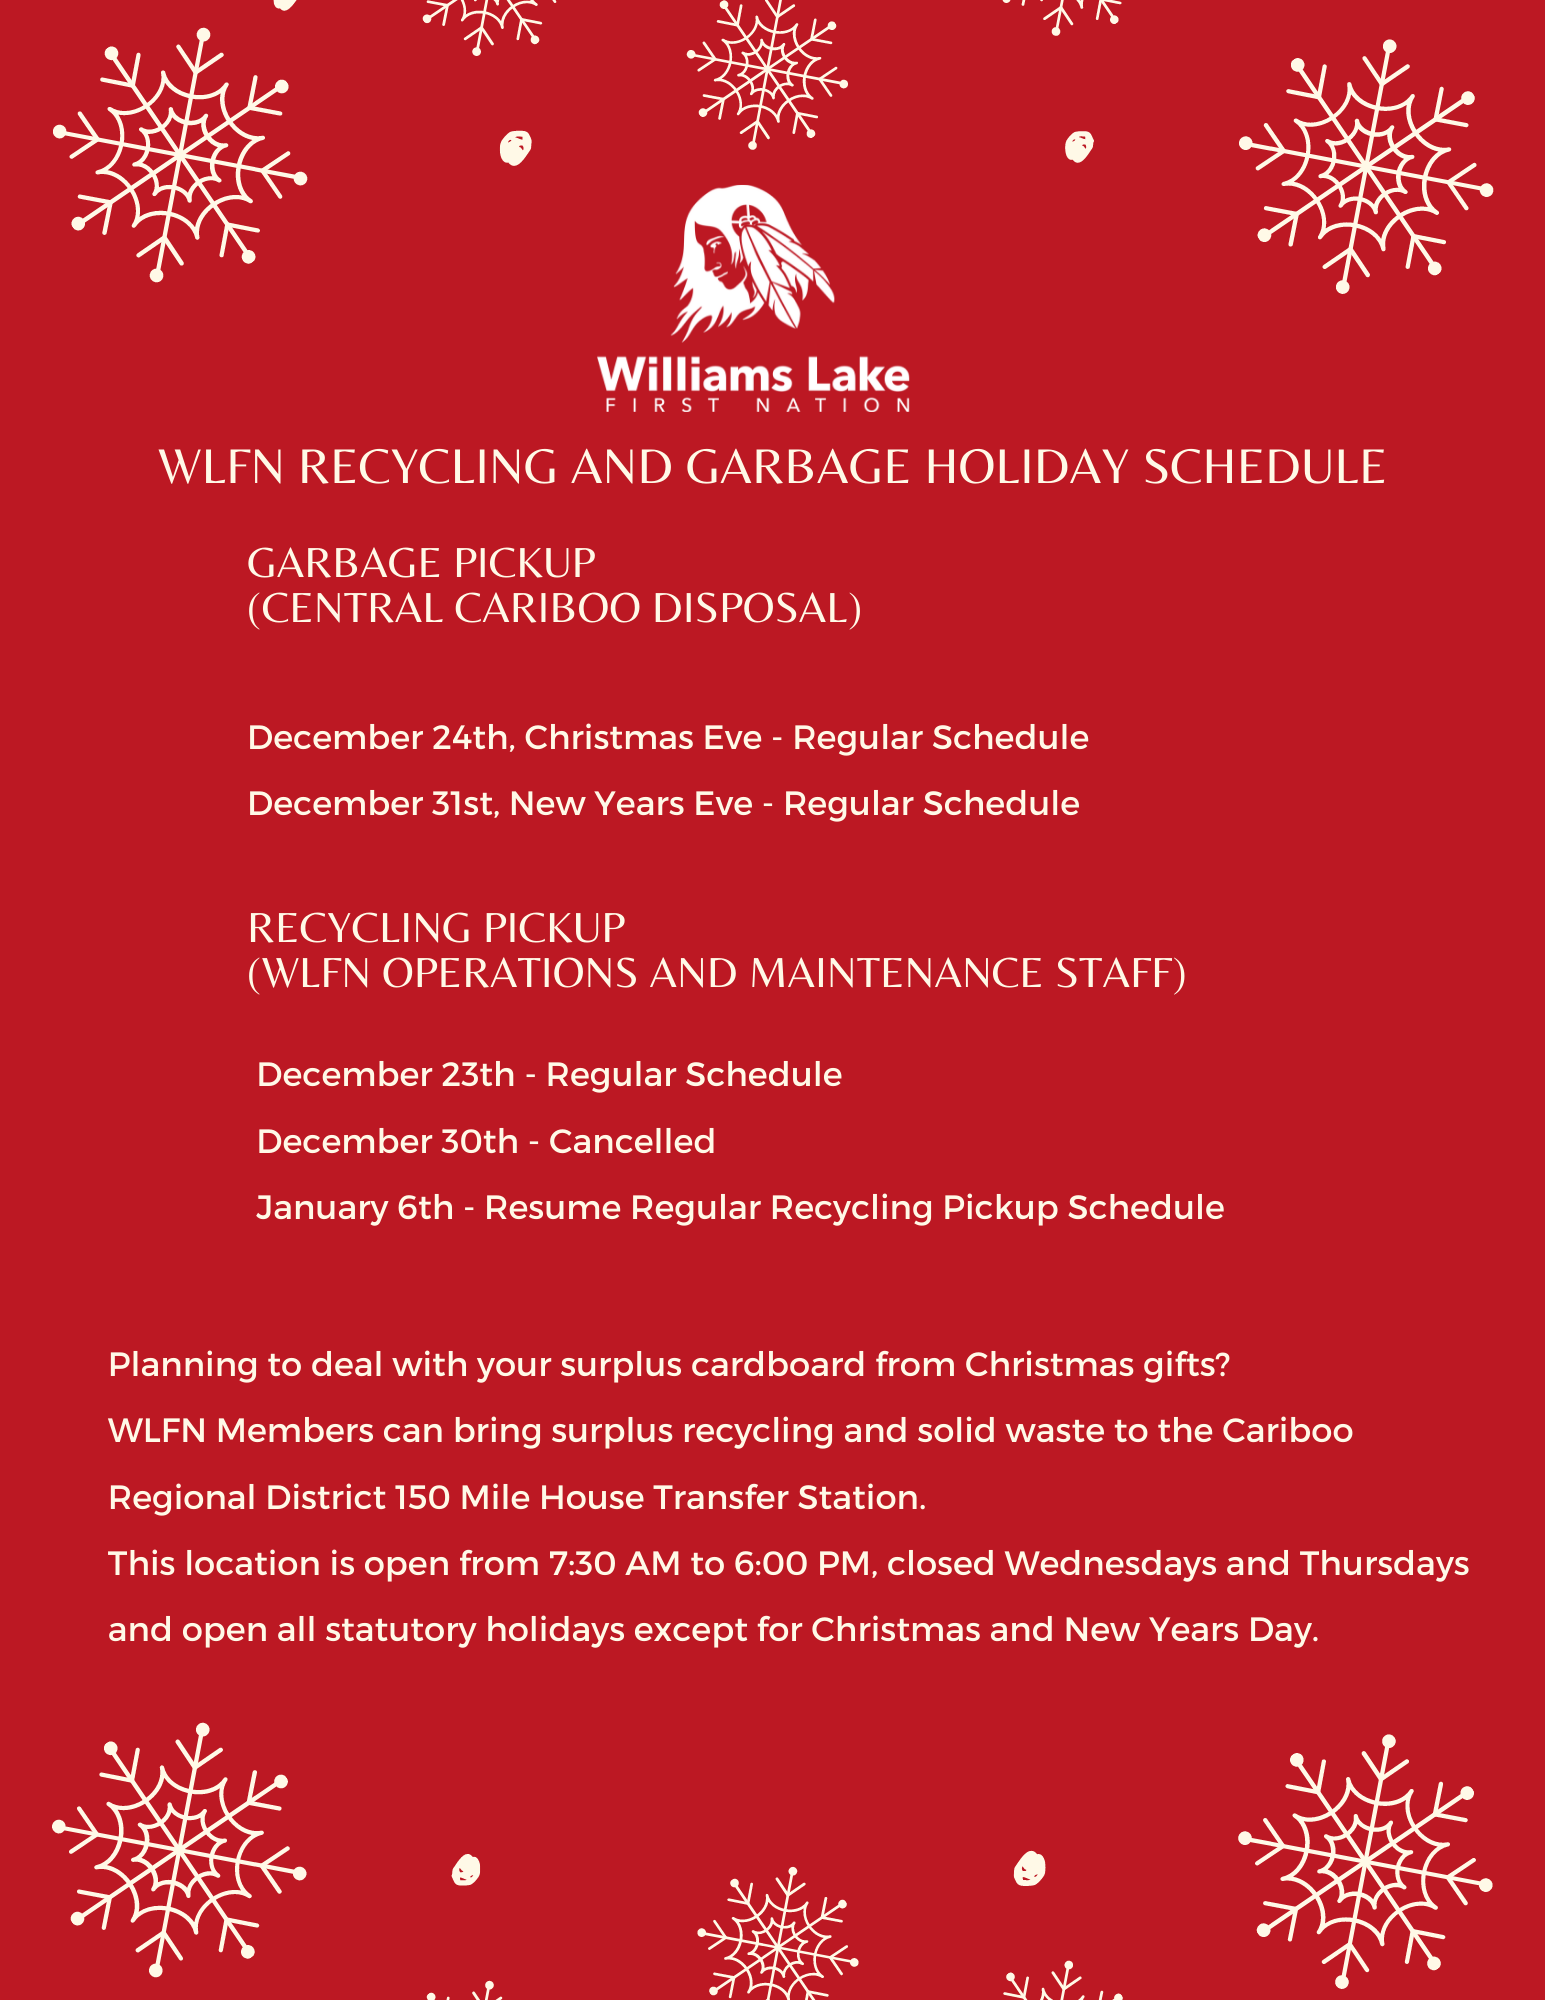 WLFN Recycling and Garbage Holiday Schedule